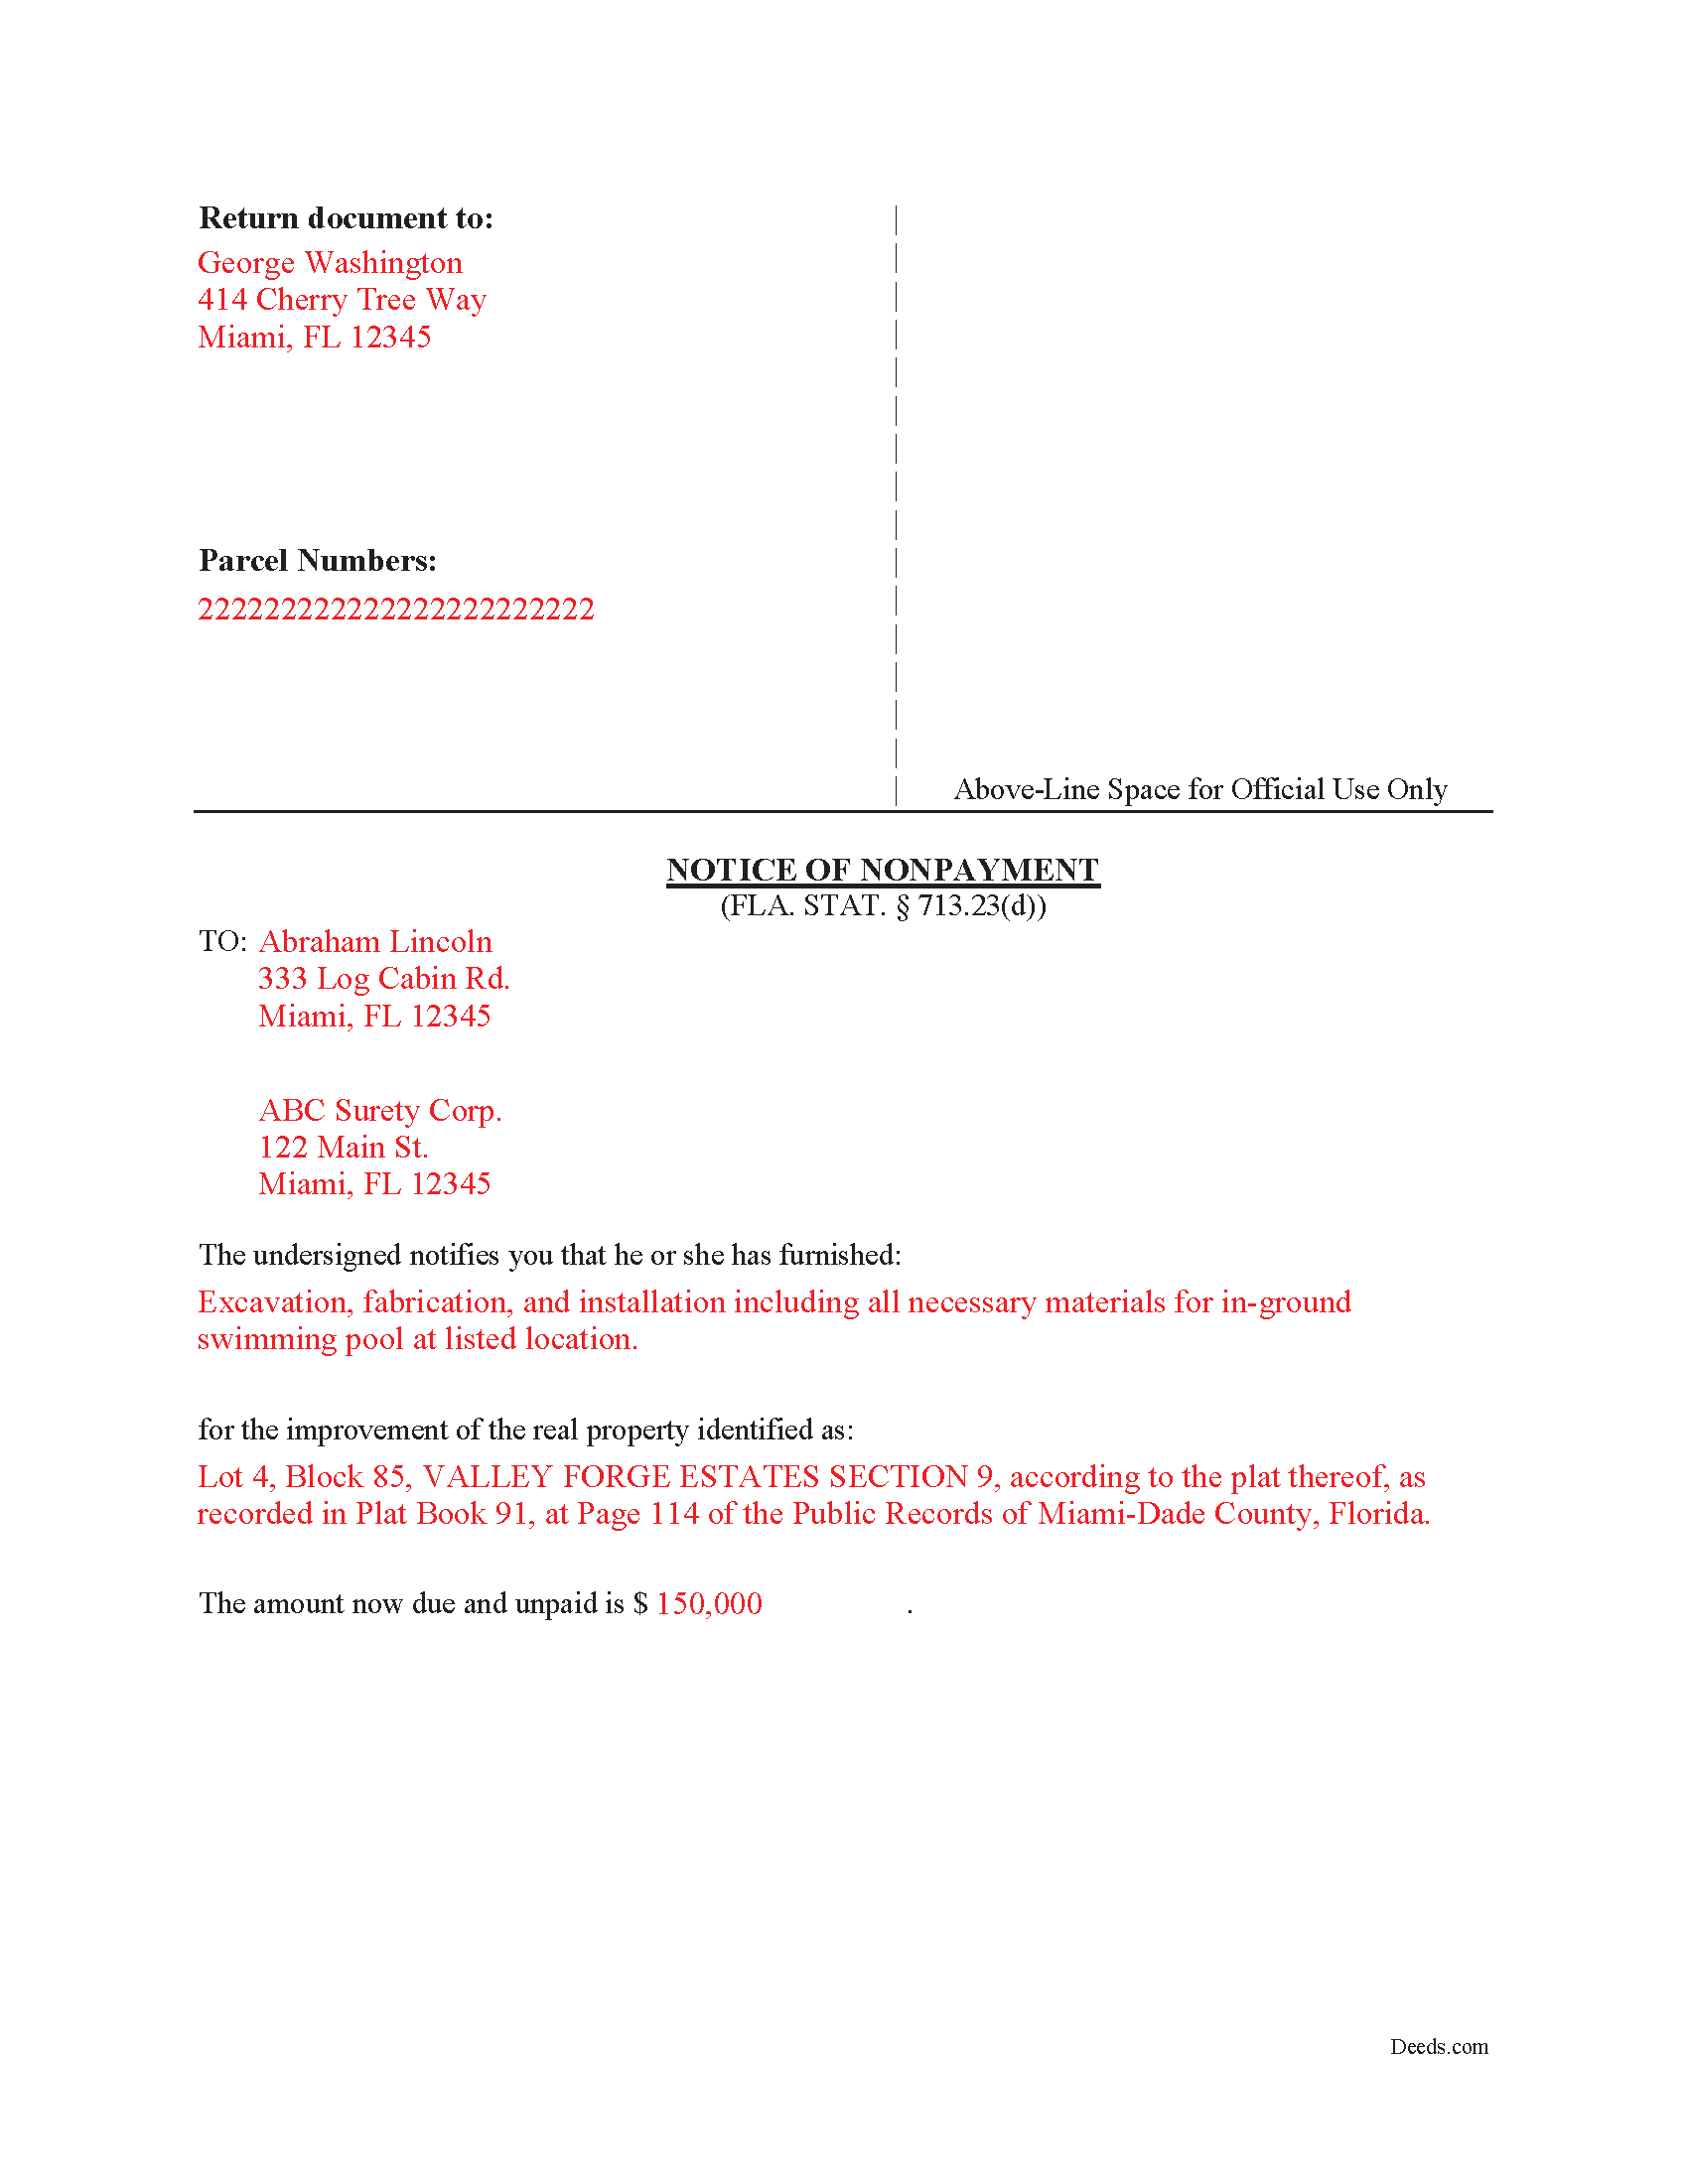 Completed Example of the Notice of Nonpayment Document